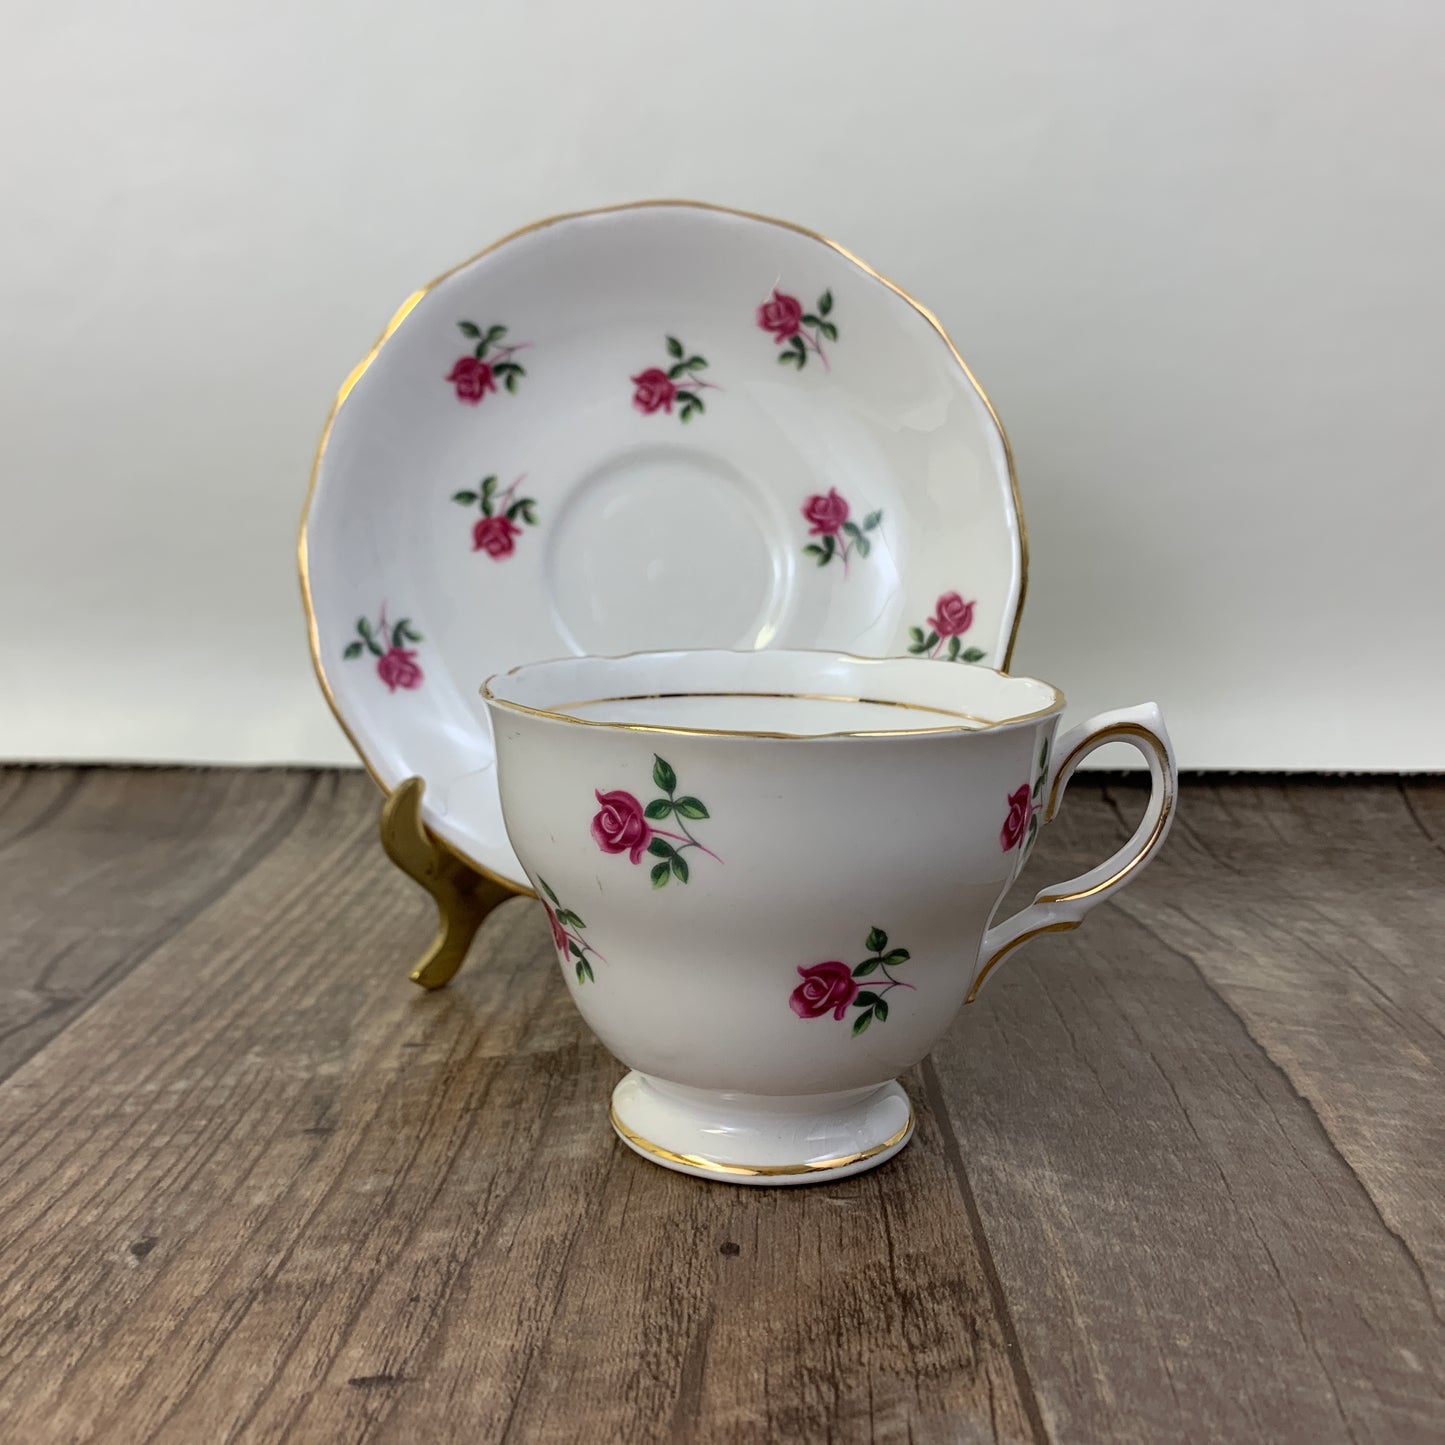 White Teacup with Tiny Pink Roses Vintage Tea Cup and Saucer Set